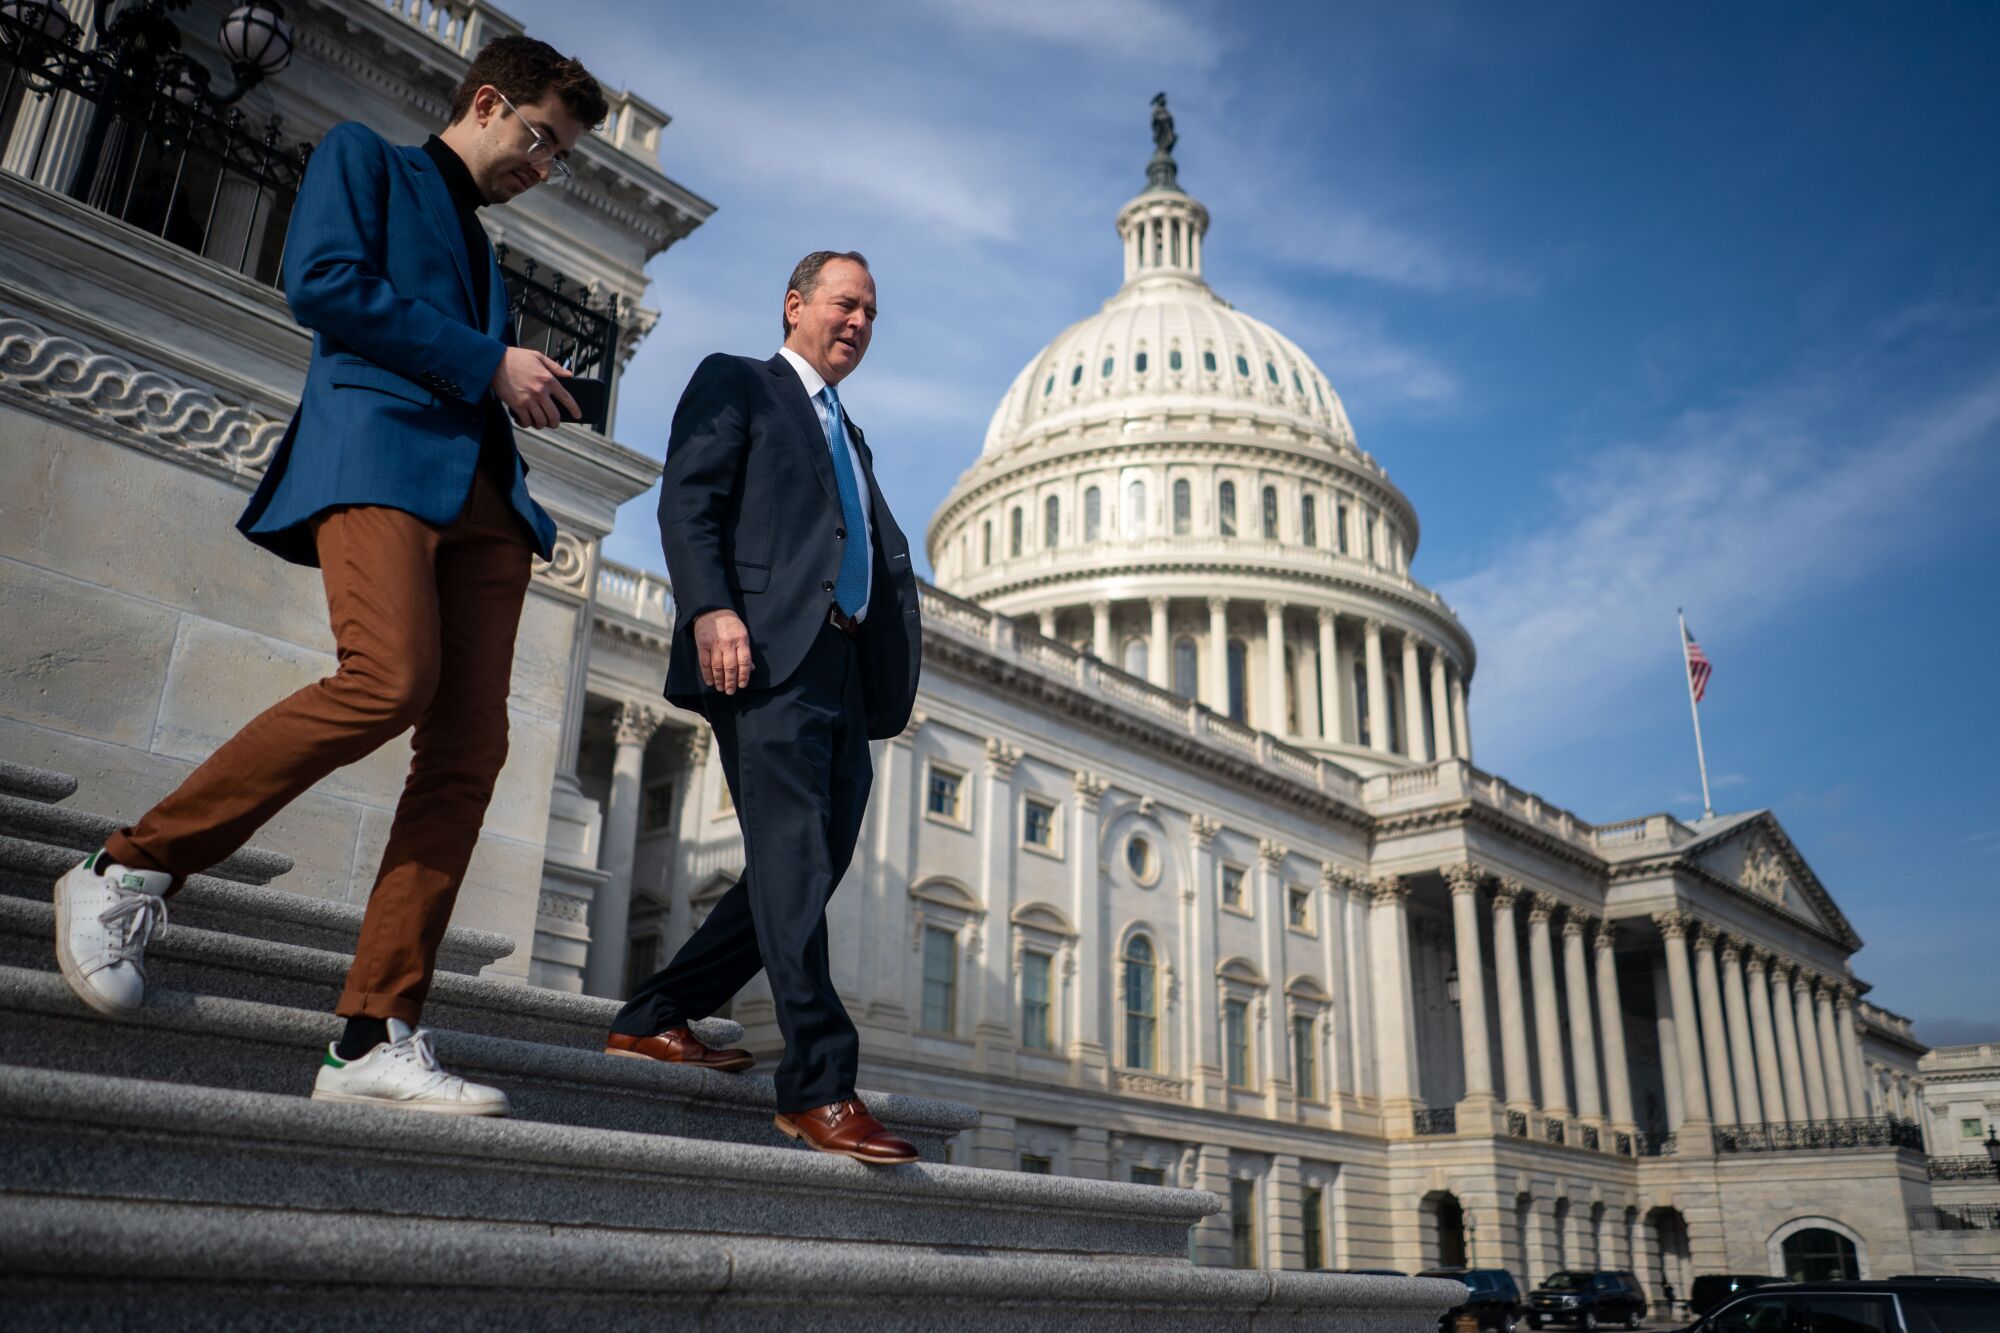 Rep. Adam Schiff speaks with a reporter as he walks down the steps of the U.S. Capitol.